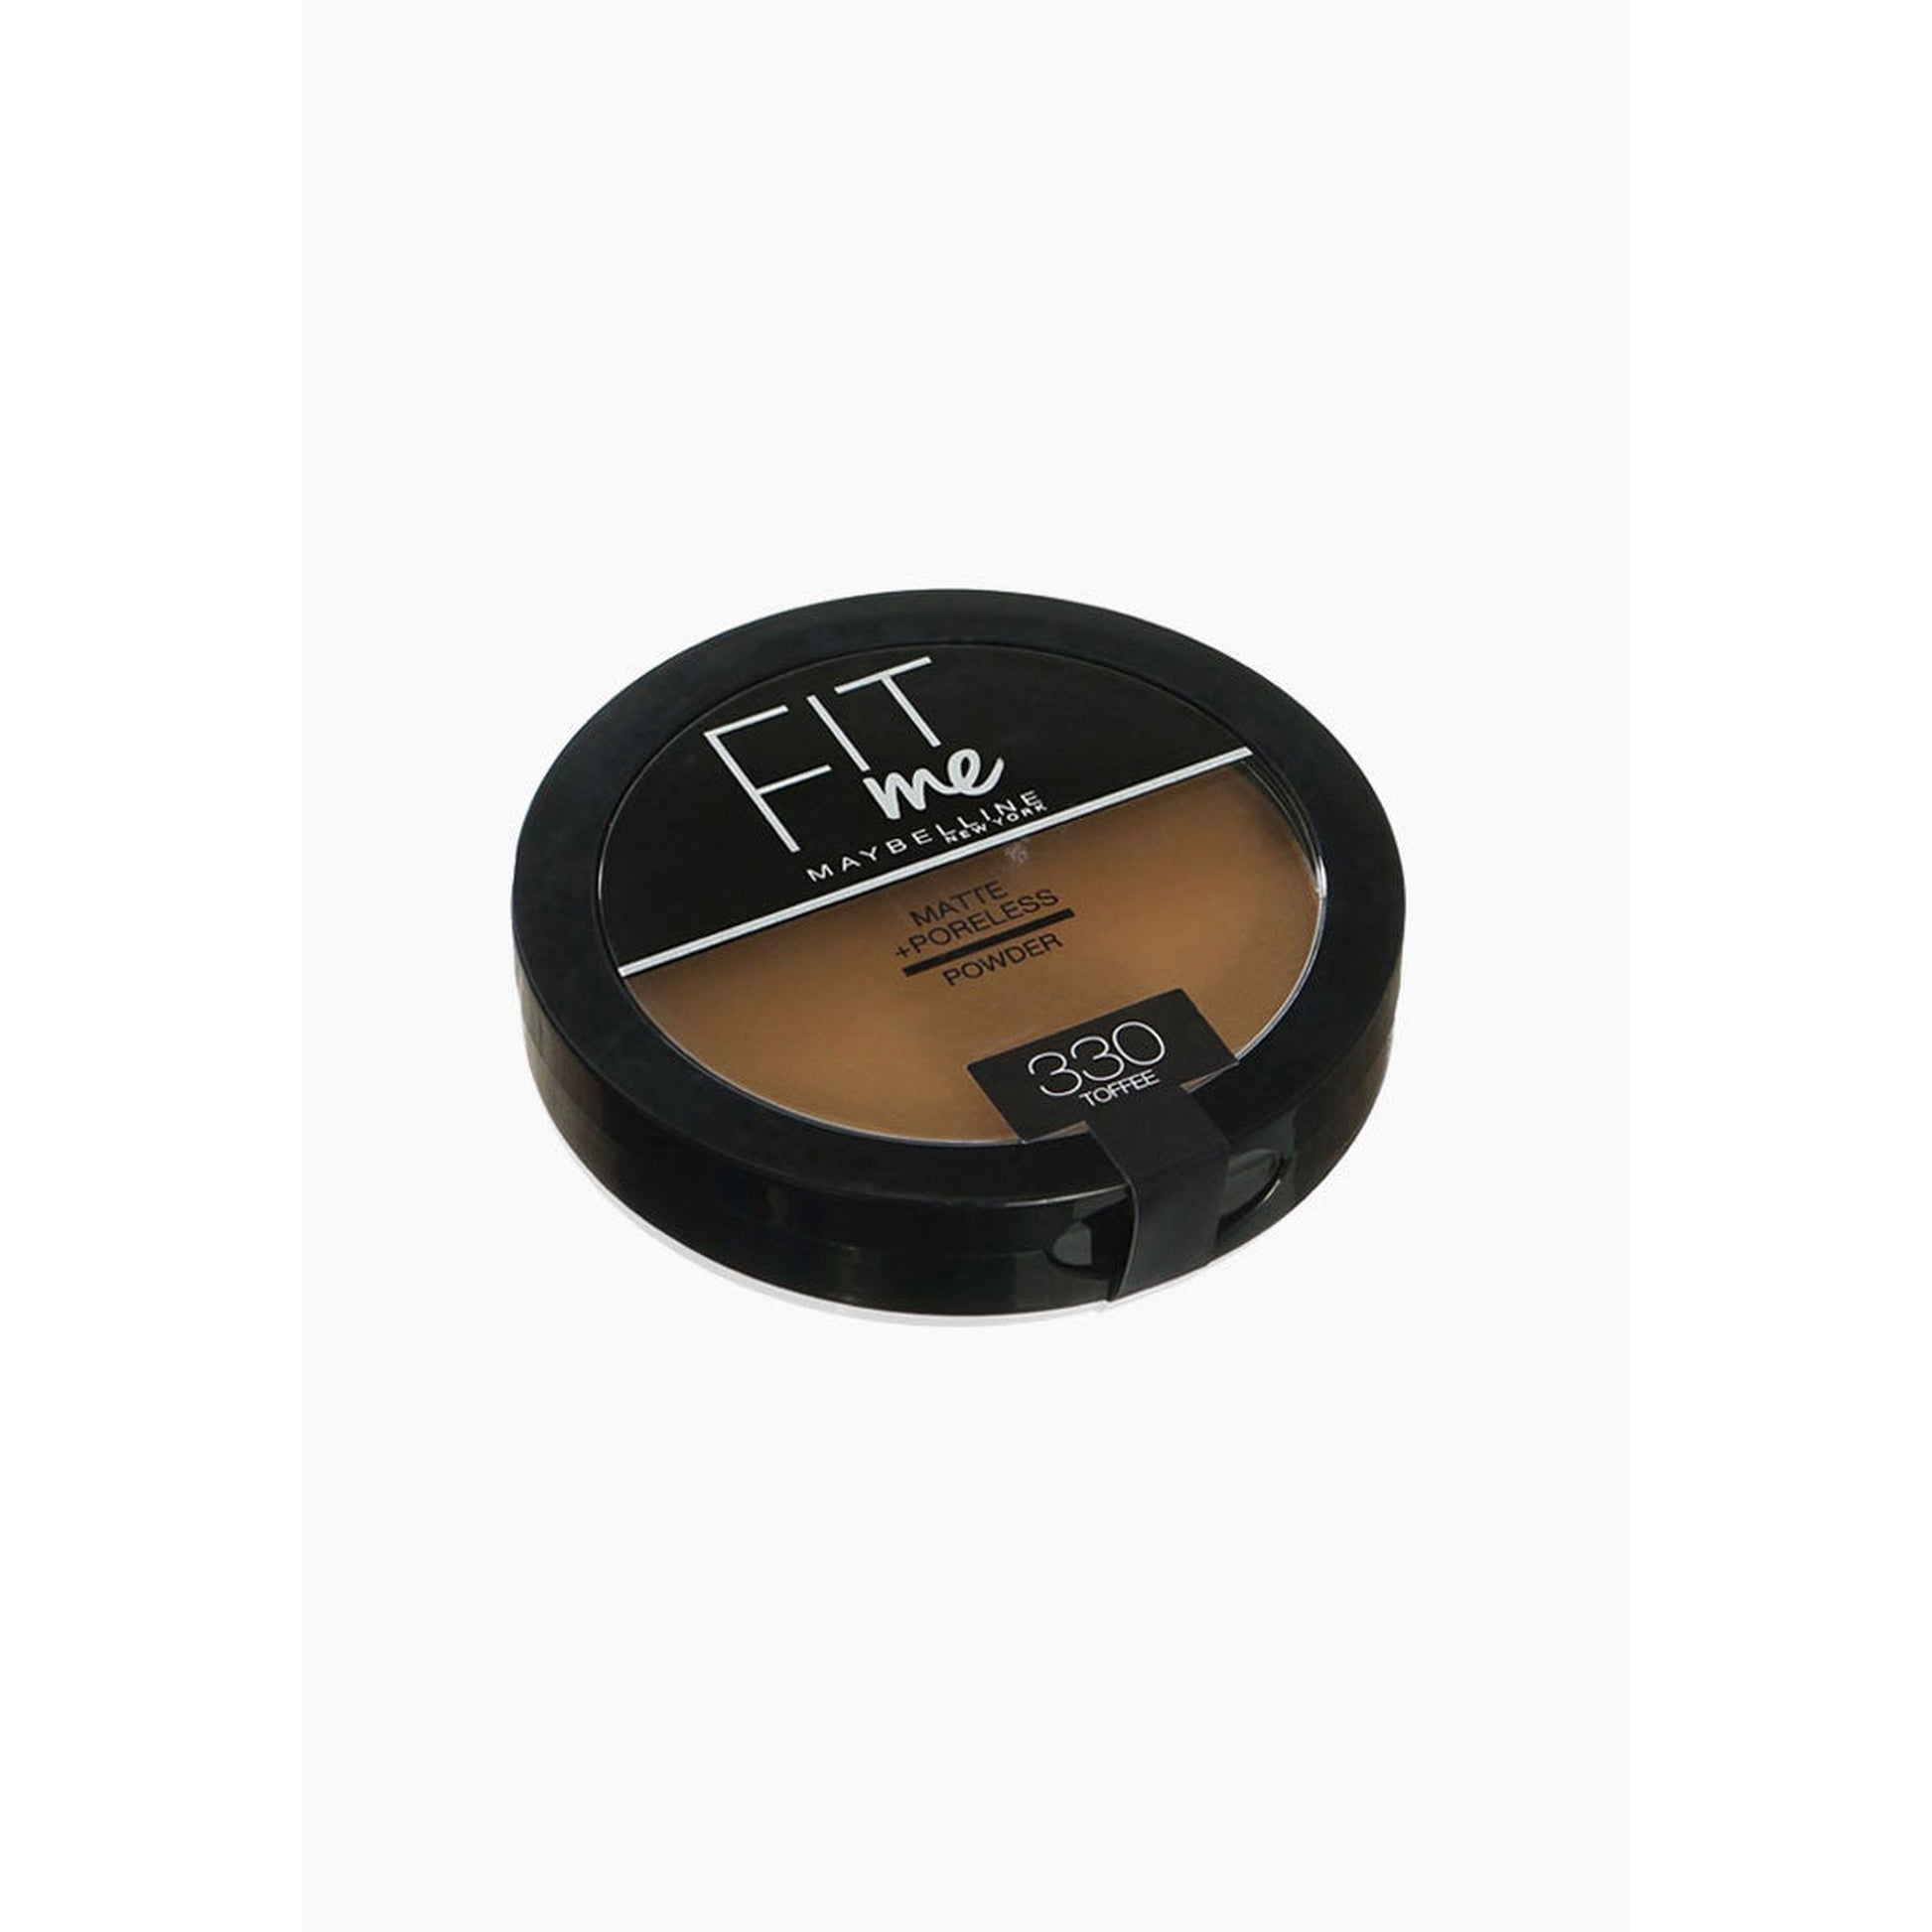 Maybelline Fit Me Matte + Poreless Pressed Powder 330 Toffee-L'Oreal-BeautyNmakeup.co.uk